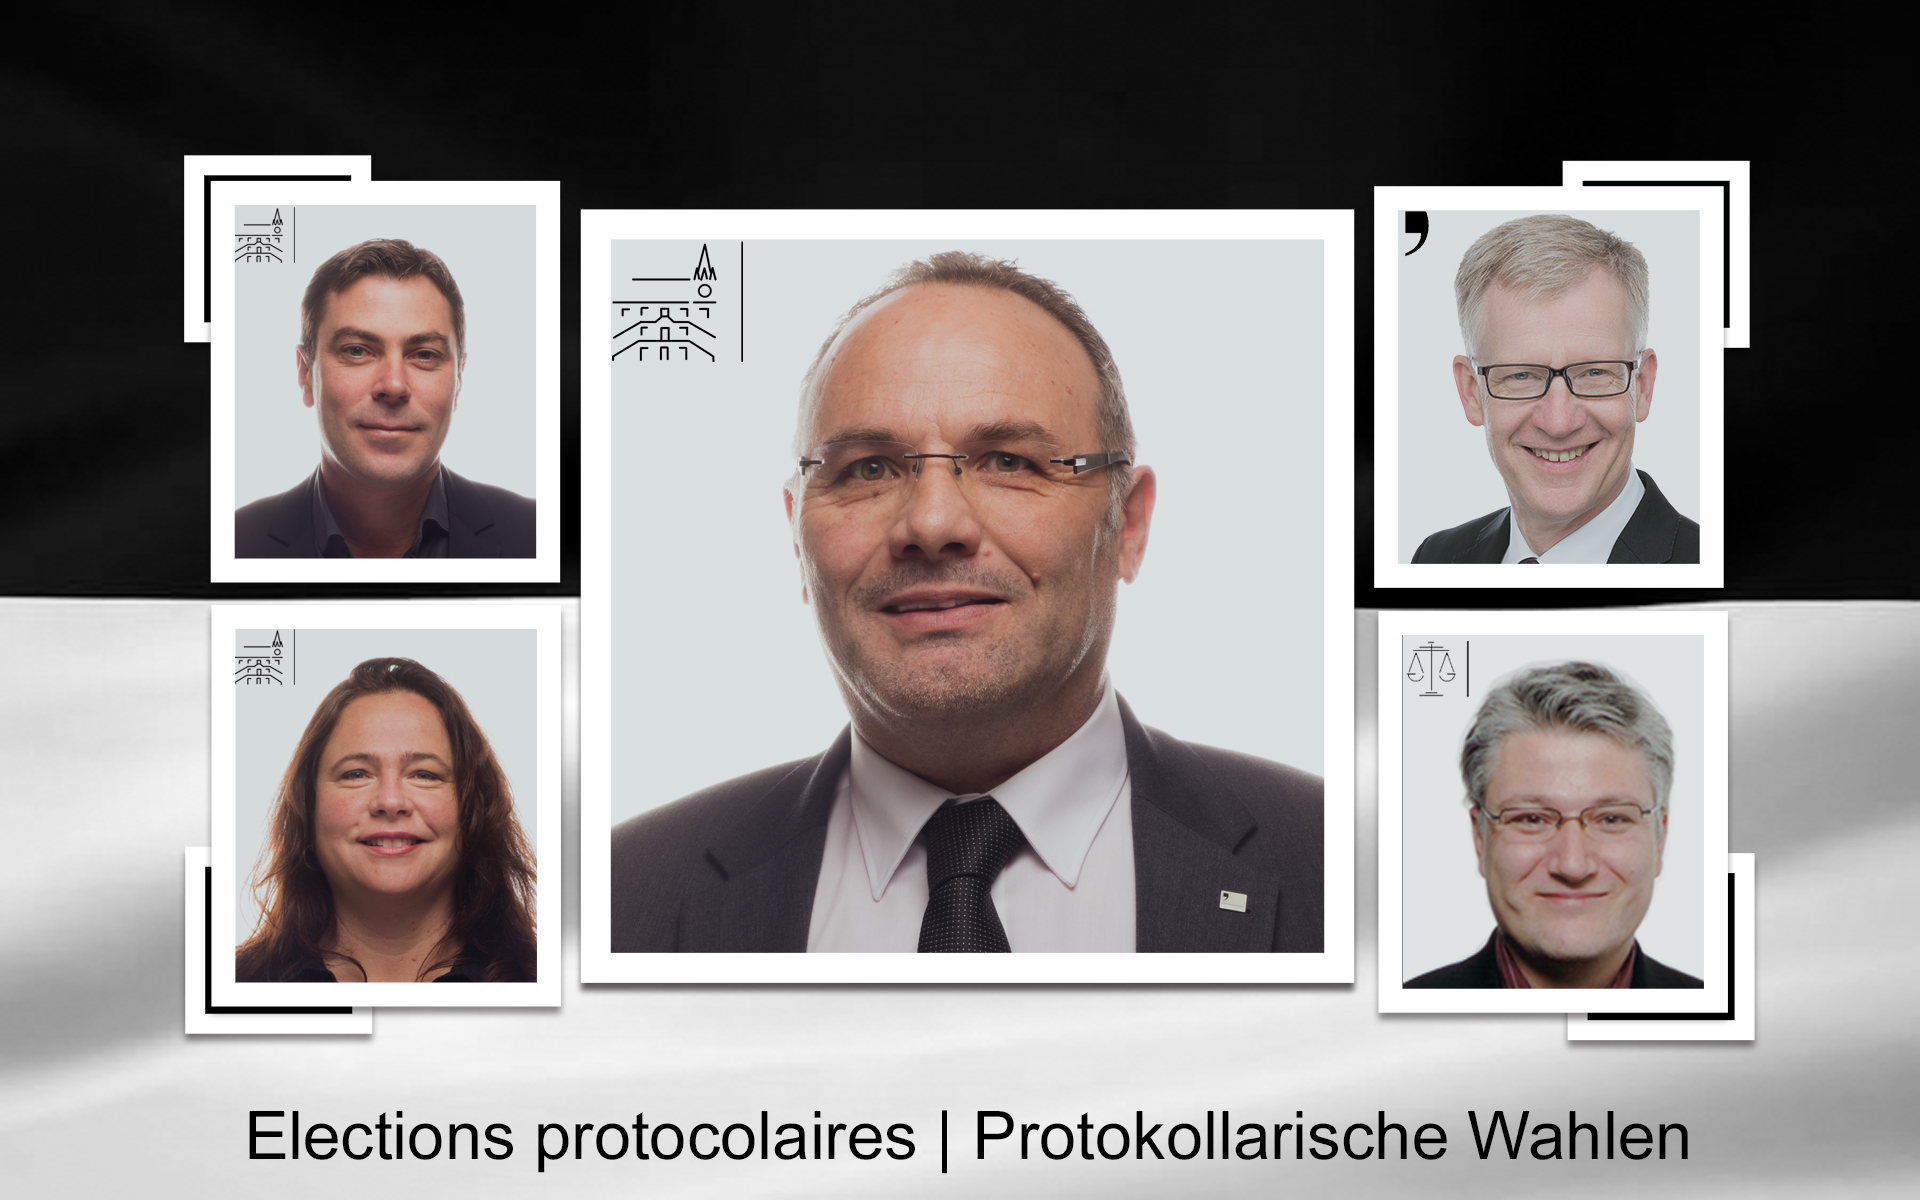 Elections protocolaires 2018